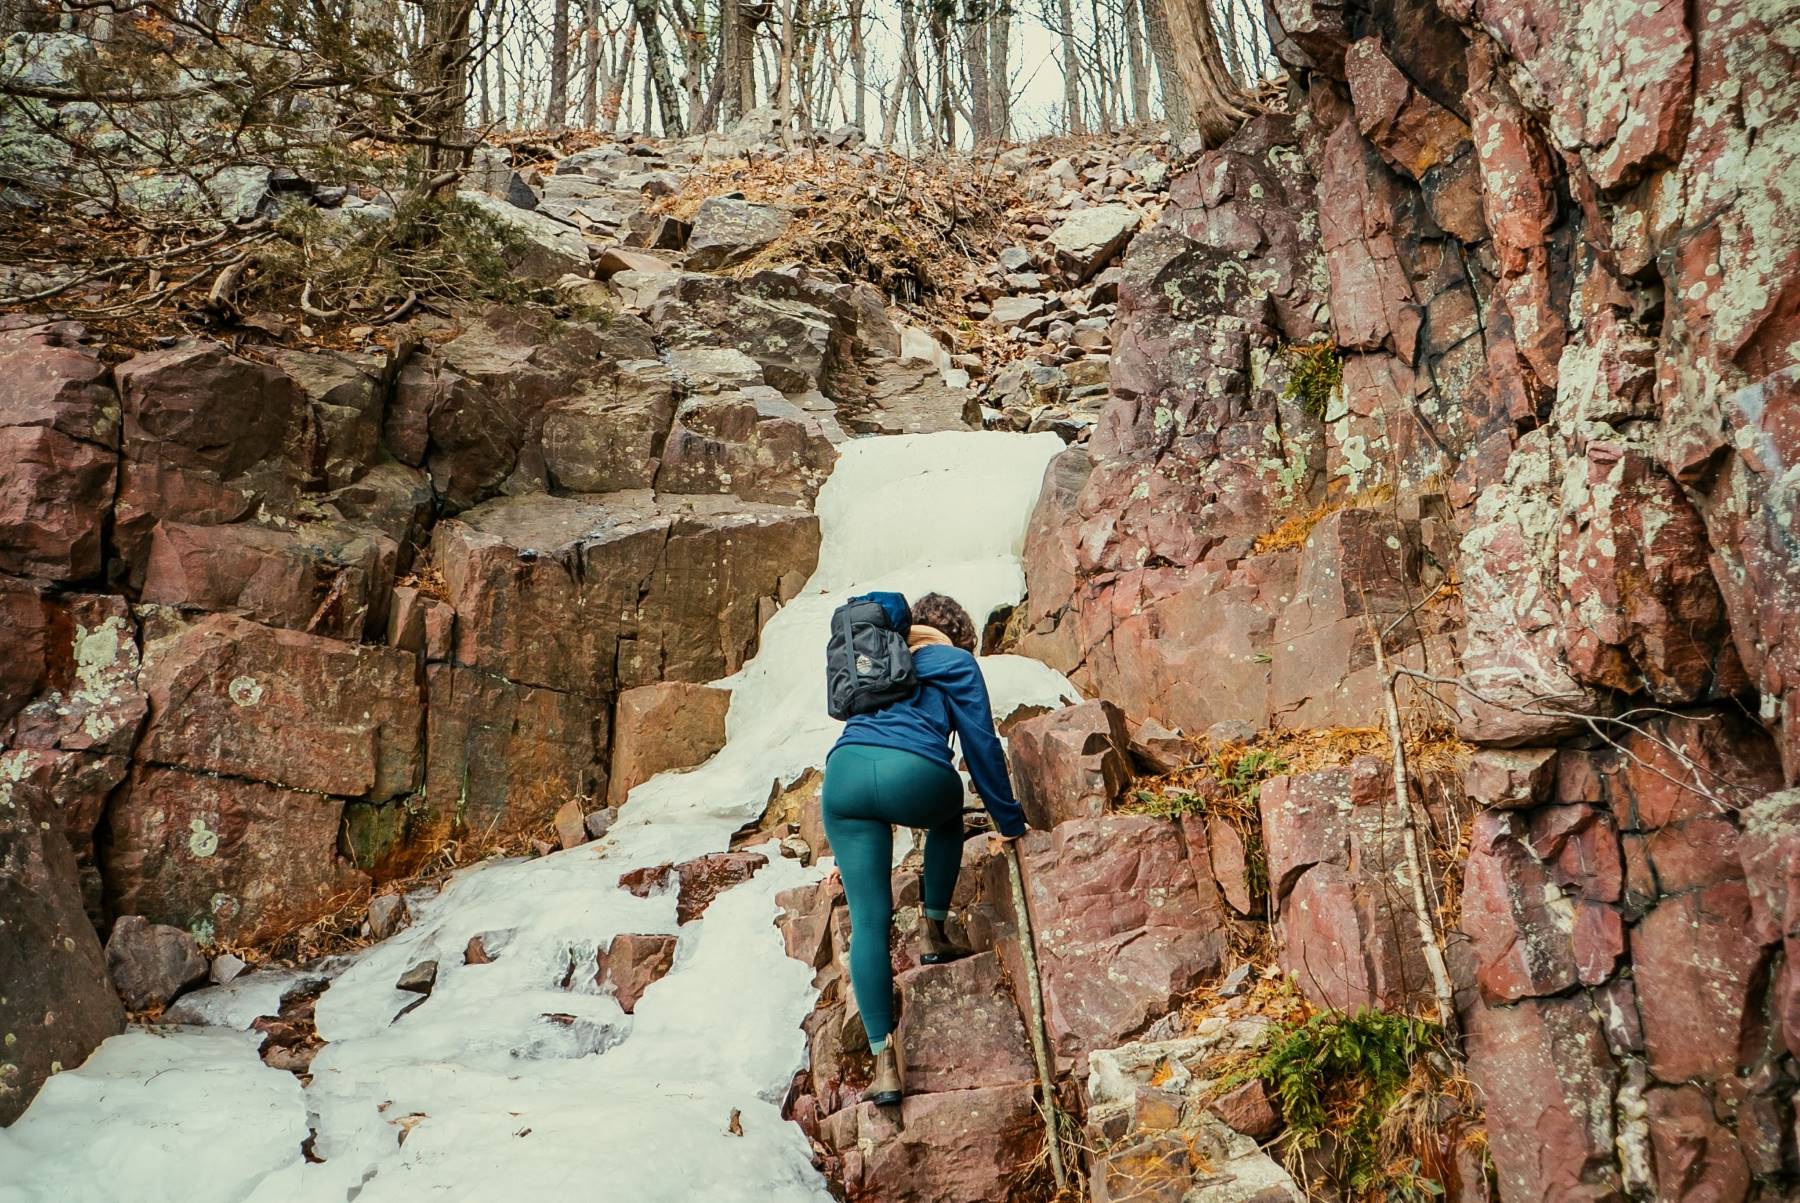 Hiking pants can even withstand scrambling up rocks near a frozen waterfall